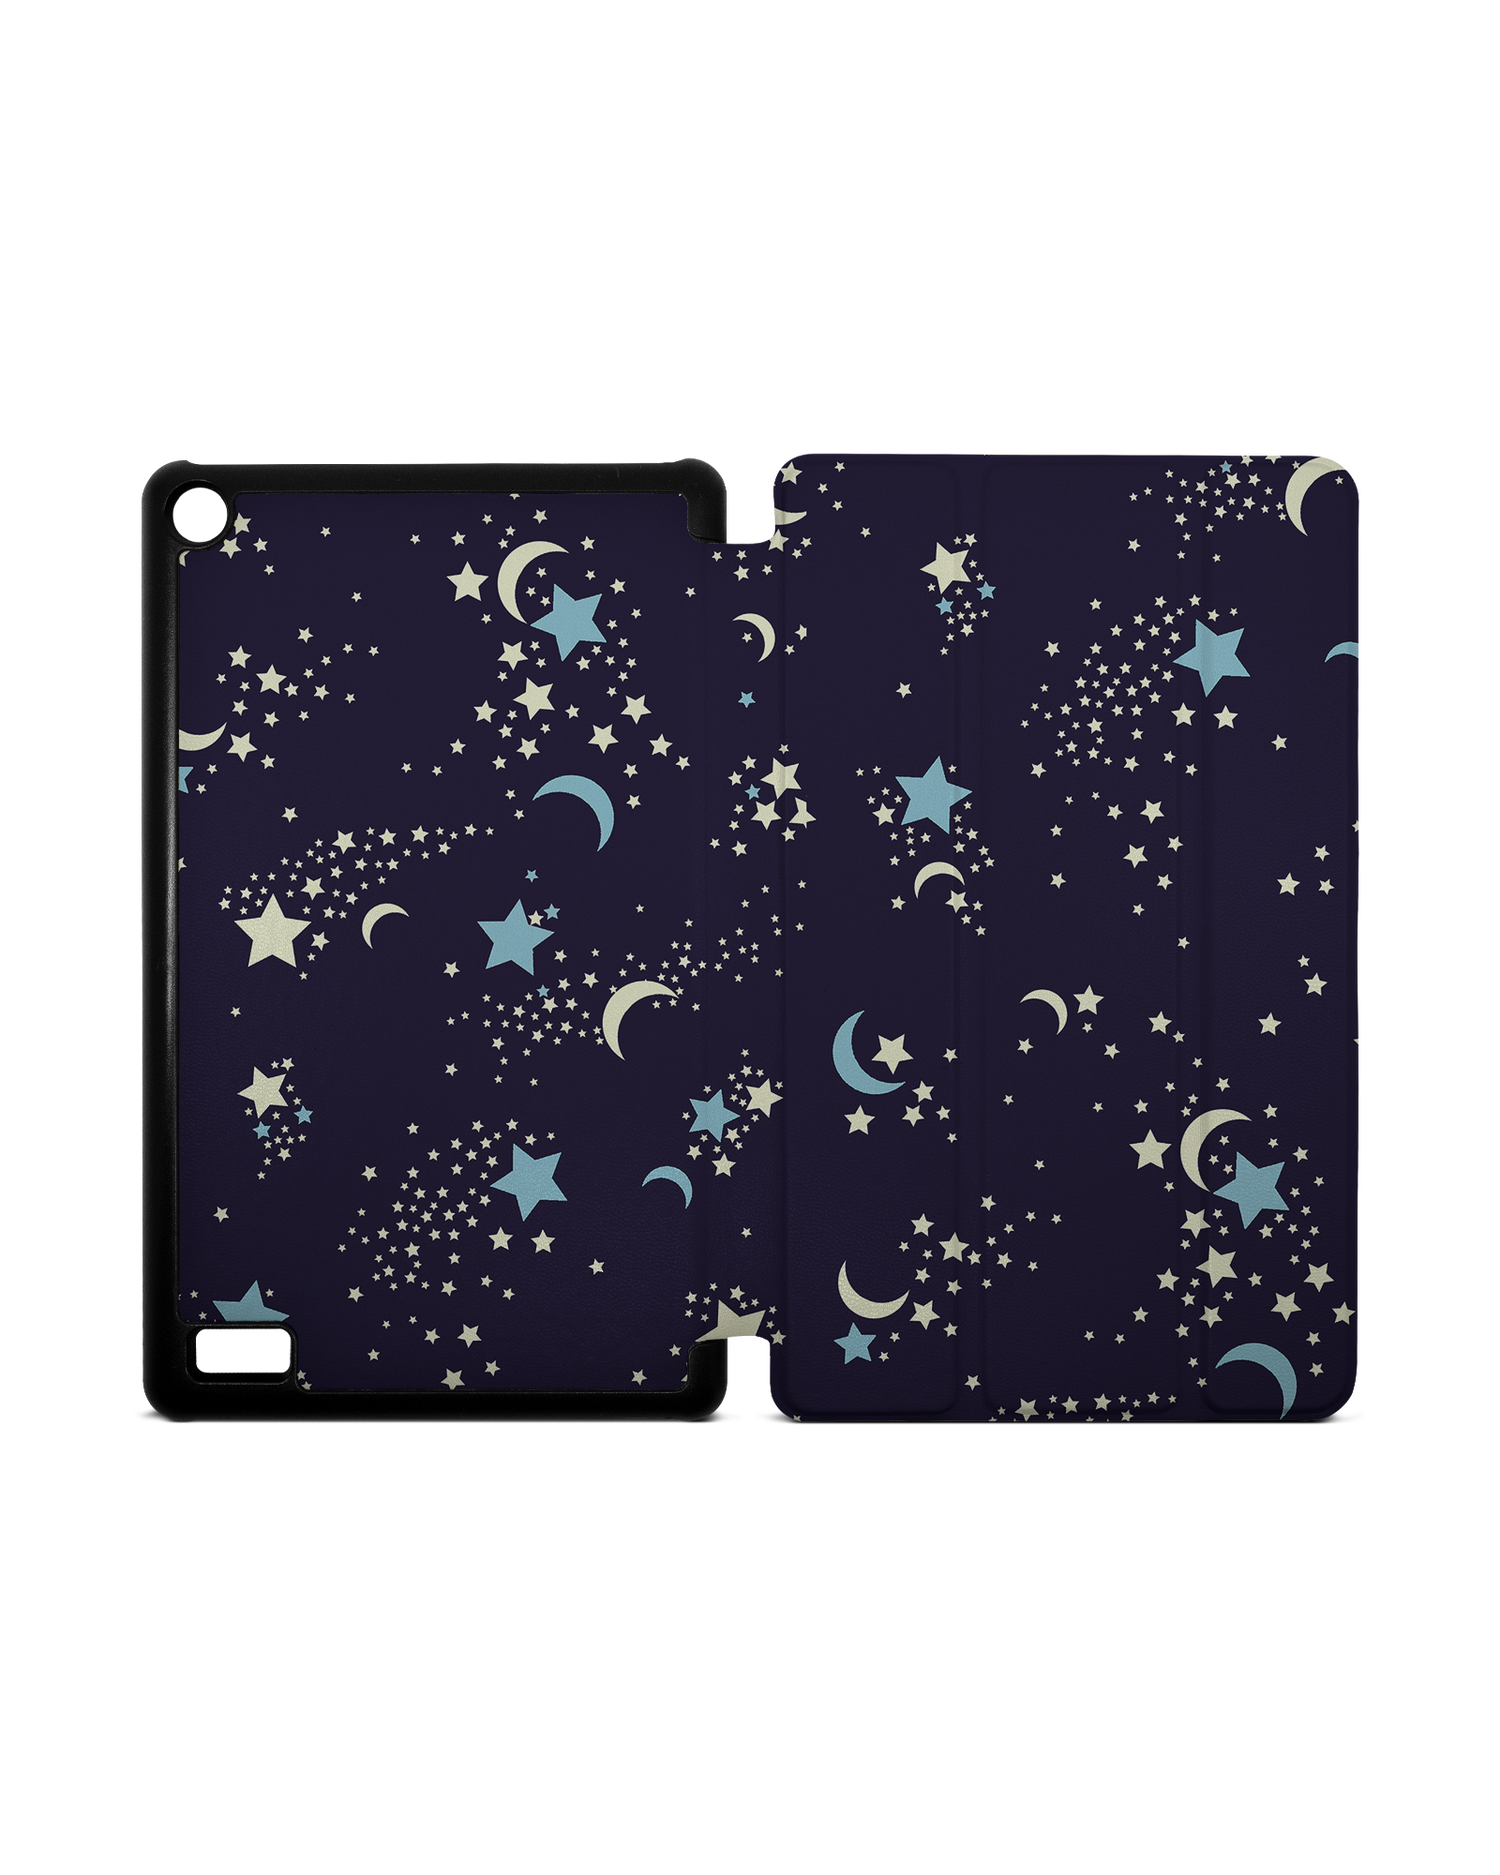 Mystical Pattern Tablet Smart Case for Amazon Fire 7: Opened